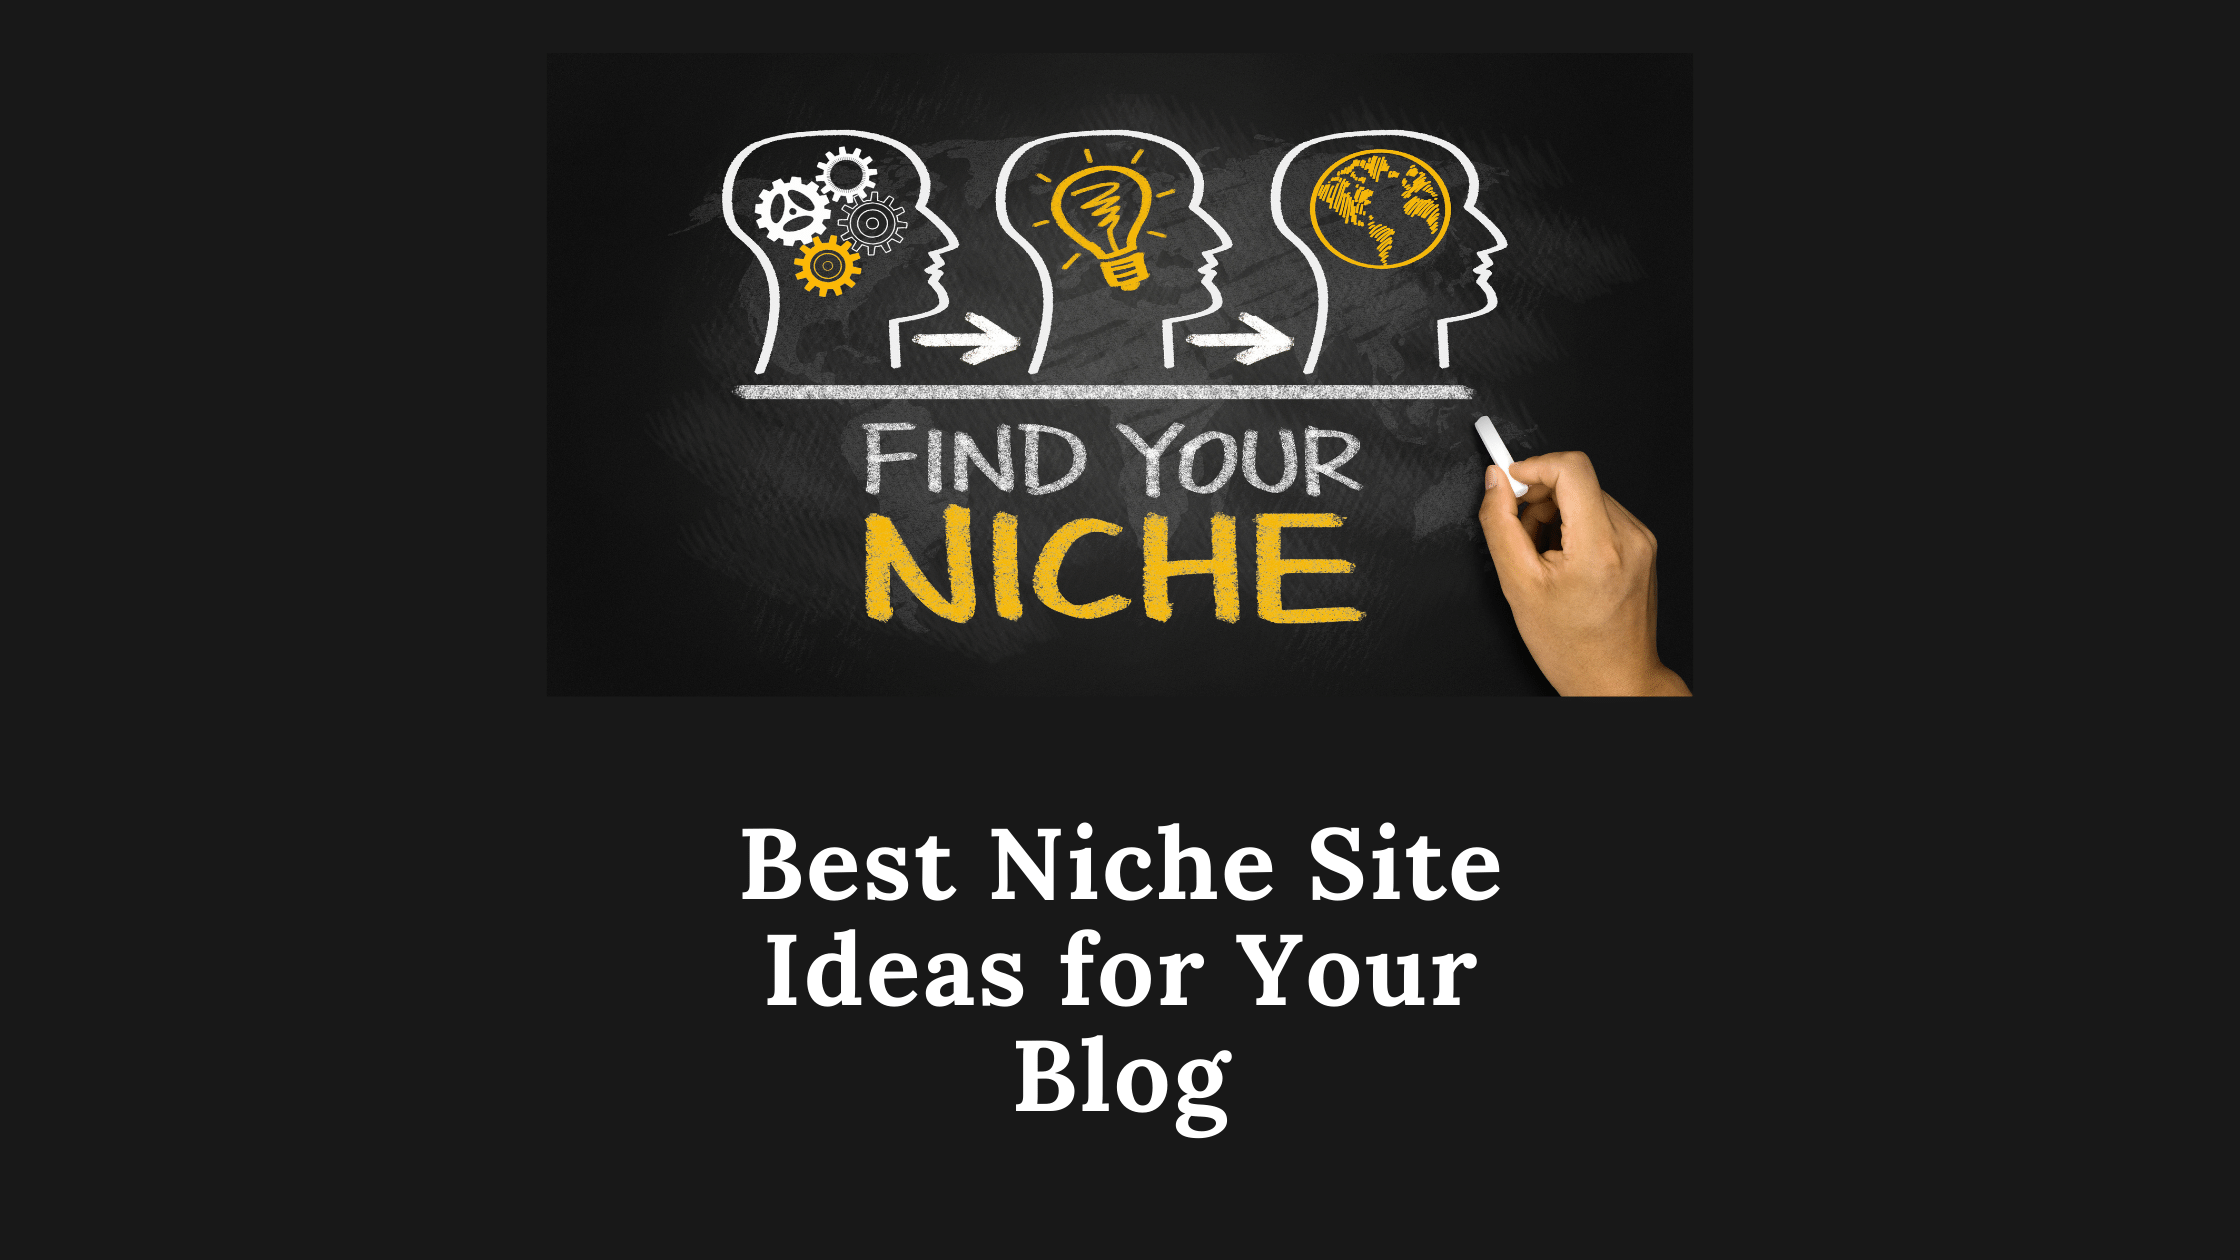 Best Niche Site Ideas for Your Blog